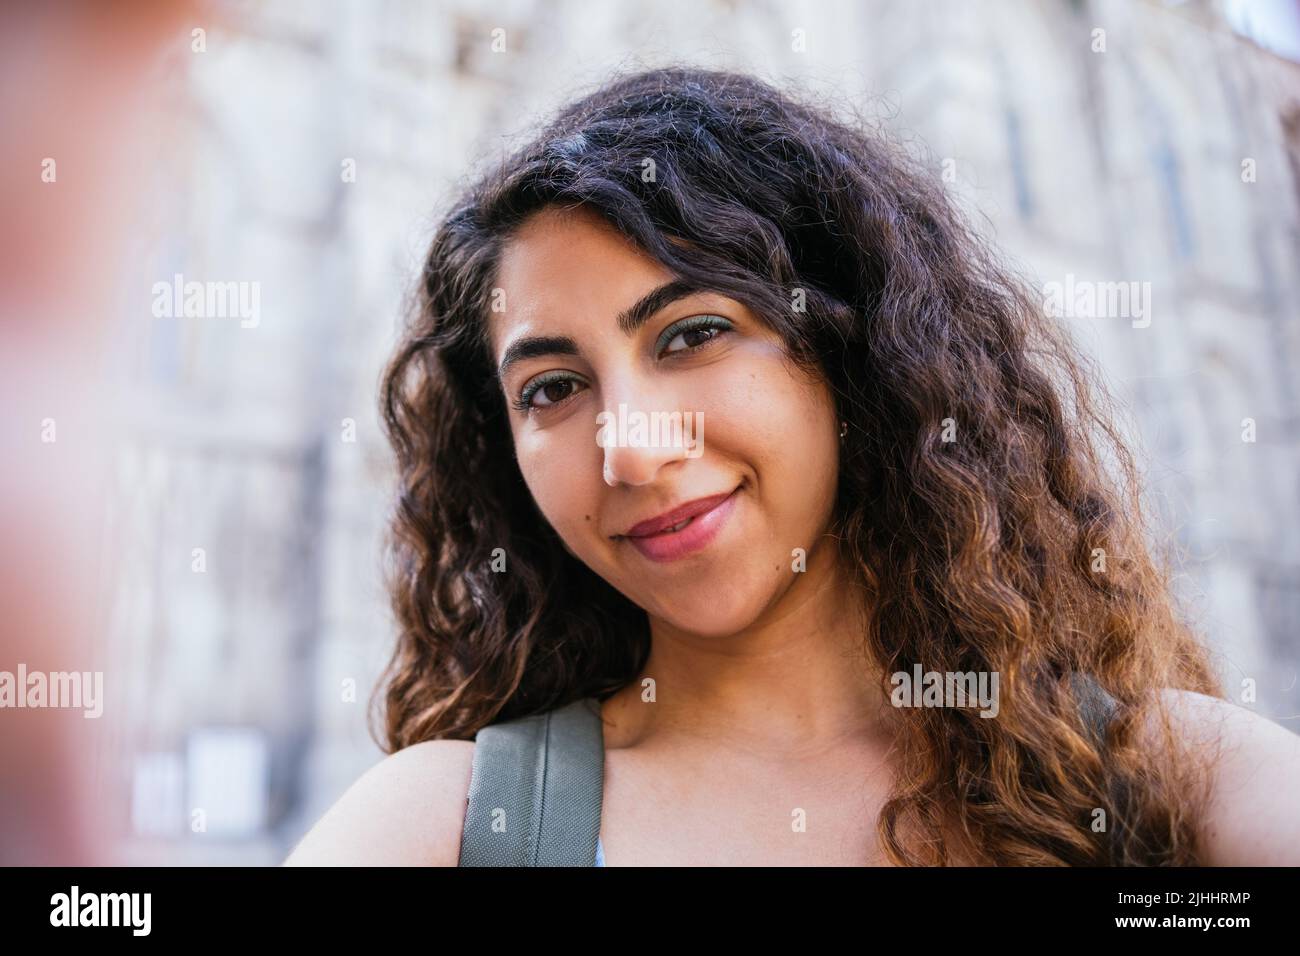 Self portrait with phone of an attractive indian young woman looking at camera in the streets Stock Photo